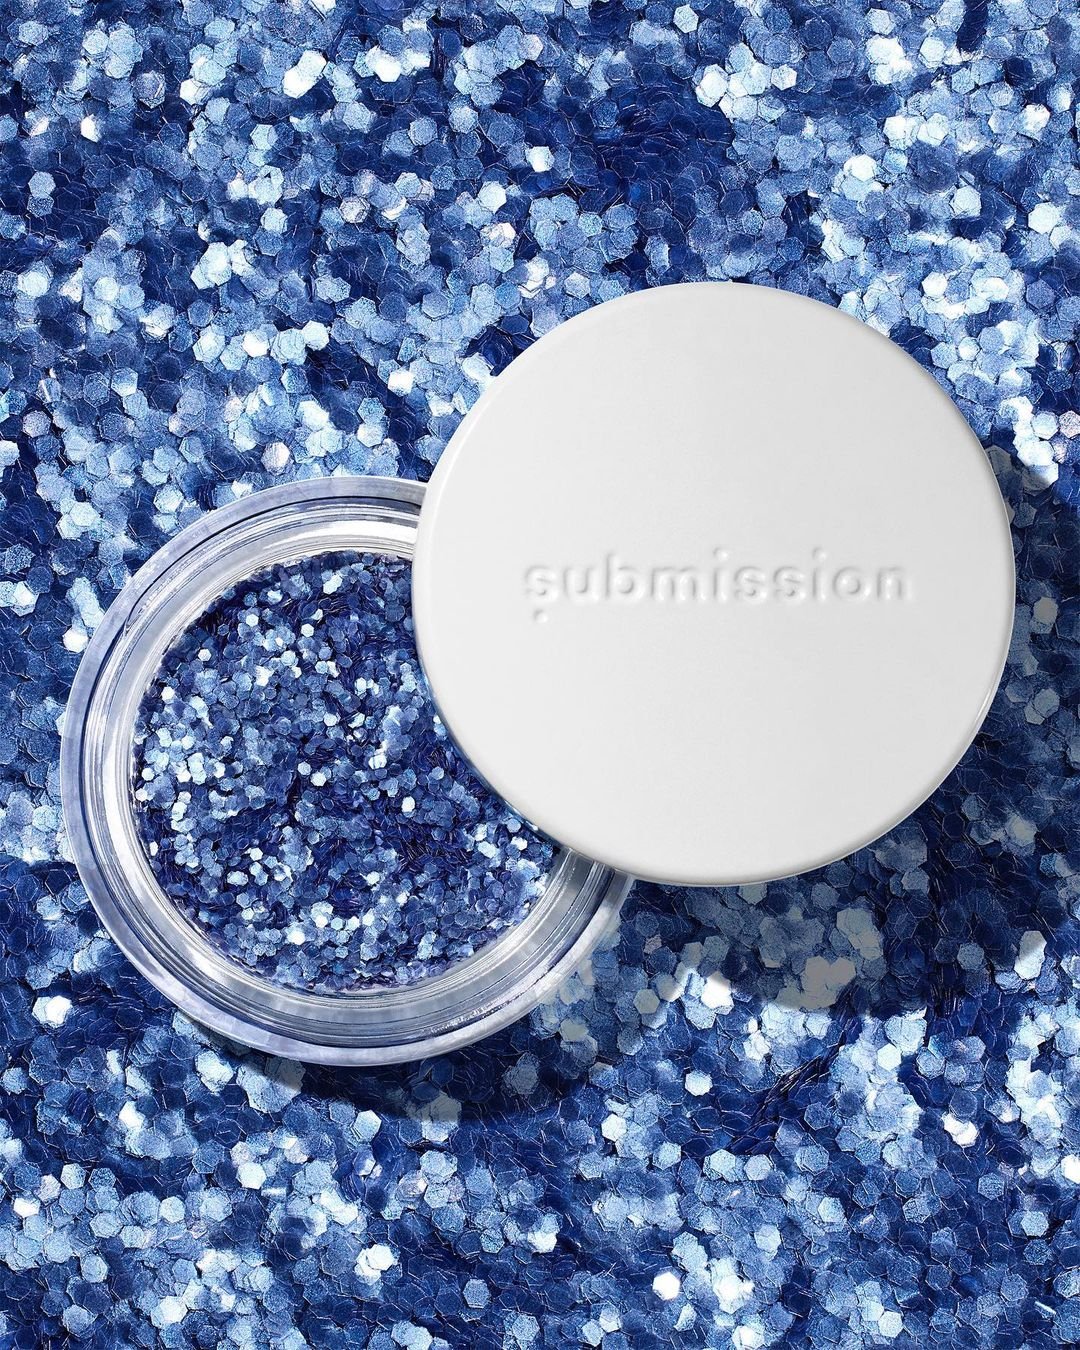 submission.beautynickbarr.cosubmission.beauty•Follow37 likessubmission.beautyTrust your nature. Submission eucalyptus-based glitter biodegrades in freshwater.3w_marcpal_🔫🔫🔫3w1 likeReplymakeupbyzeniajaeger💙 @nickbarr.co 💎.jpg